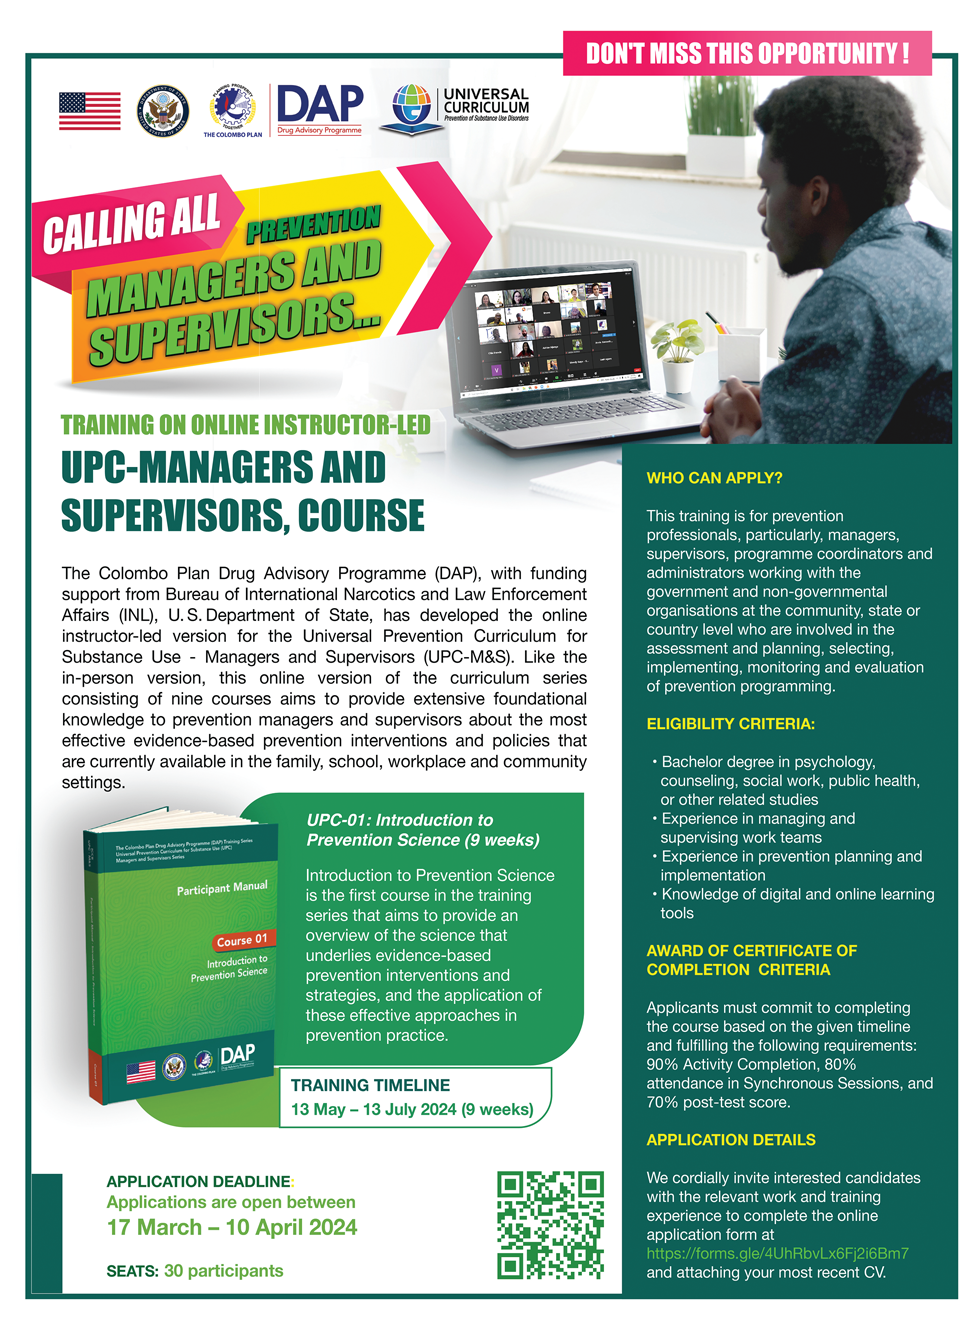 The Drug Advisory Programme (DAP), with funding support from The Bureau of International Narcotics and Law Enforcement Affairs (INL), US Department of State, has developed the online instructor-led version of the Universal Prevention Curriculum for Substance Use – Managers and Supervisors (UPC-M&S).Like the in-person version, this online version of the curriculum series consisting of nine courses aims to provide extensive foundational knowledge to prevention managers and supervisors about the most effective evidence-based prevention interventions and policies that are currently available in the family, school, workplace and community settings.